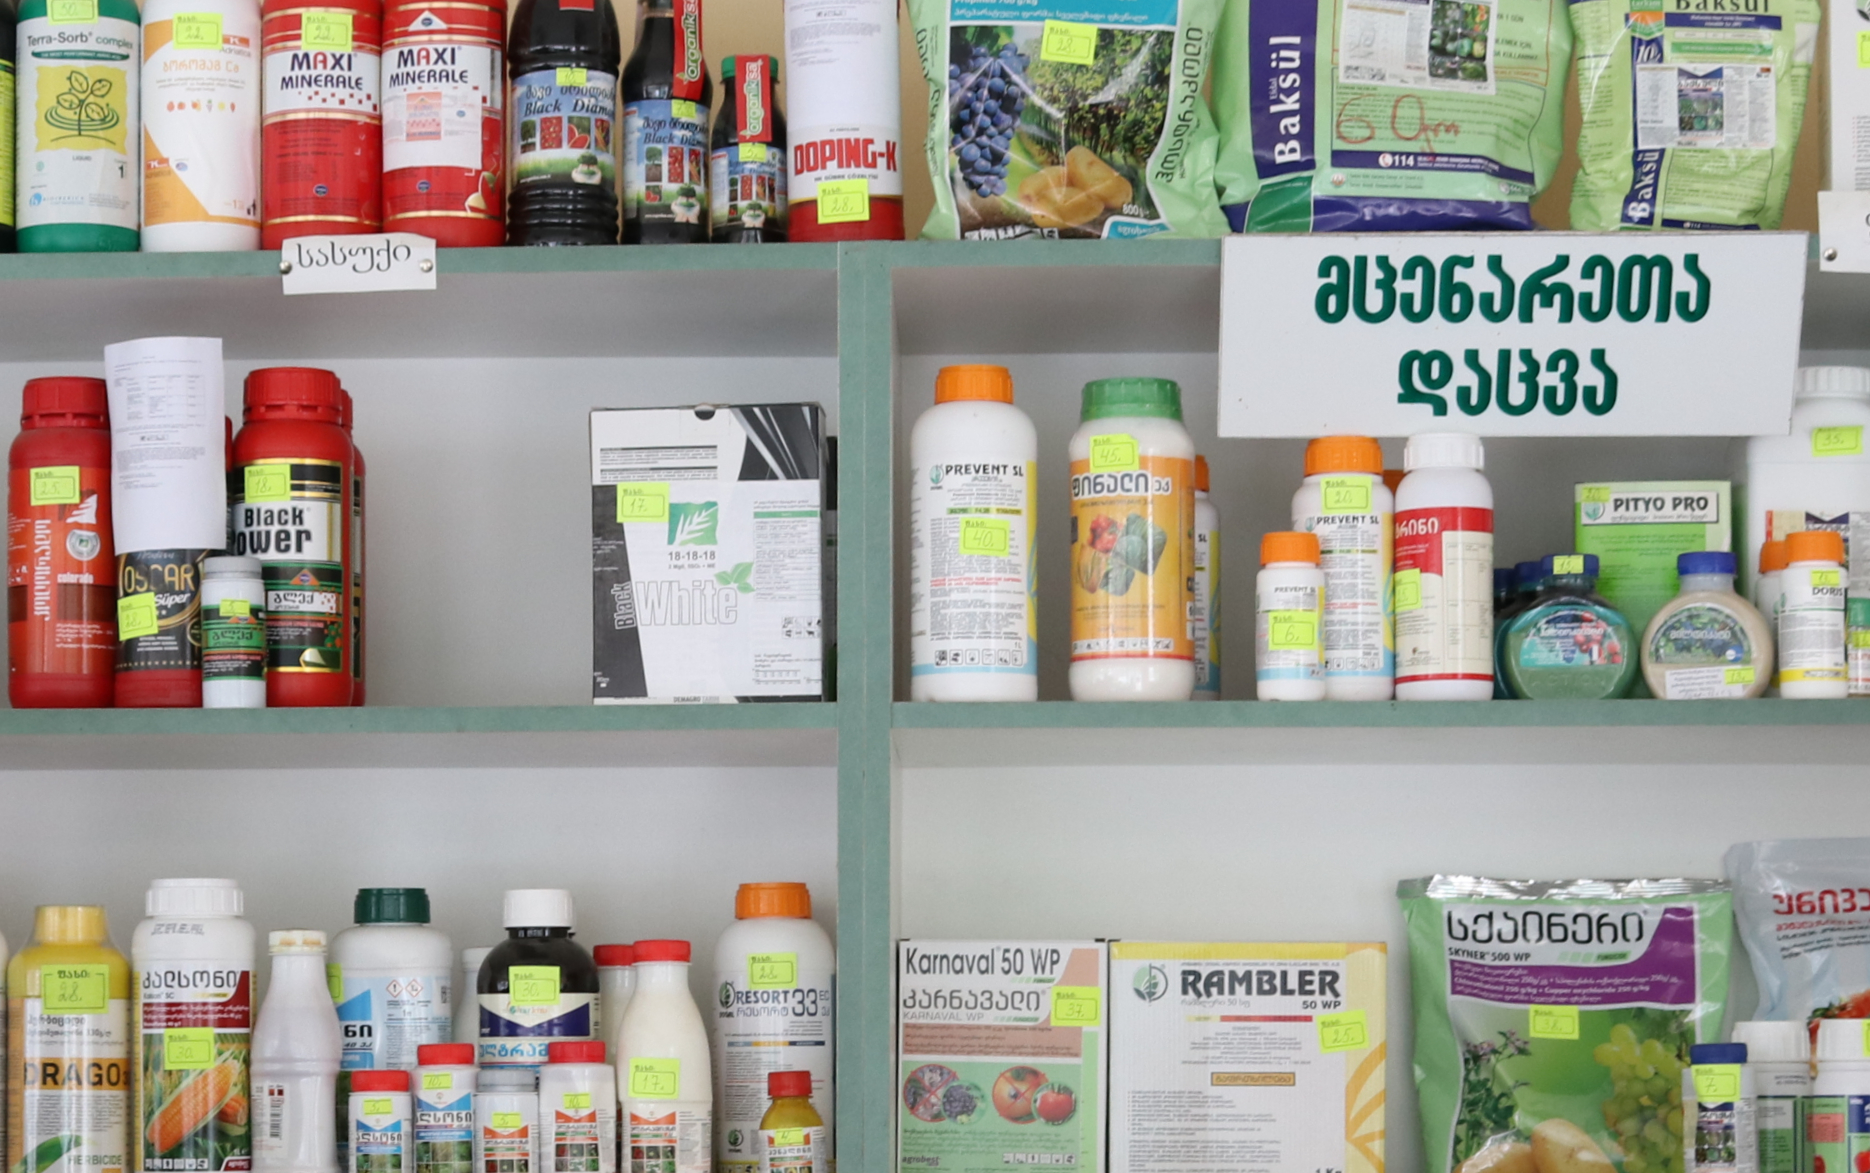 52 shops of pesticides and agrochemicals were fined in Kakheti